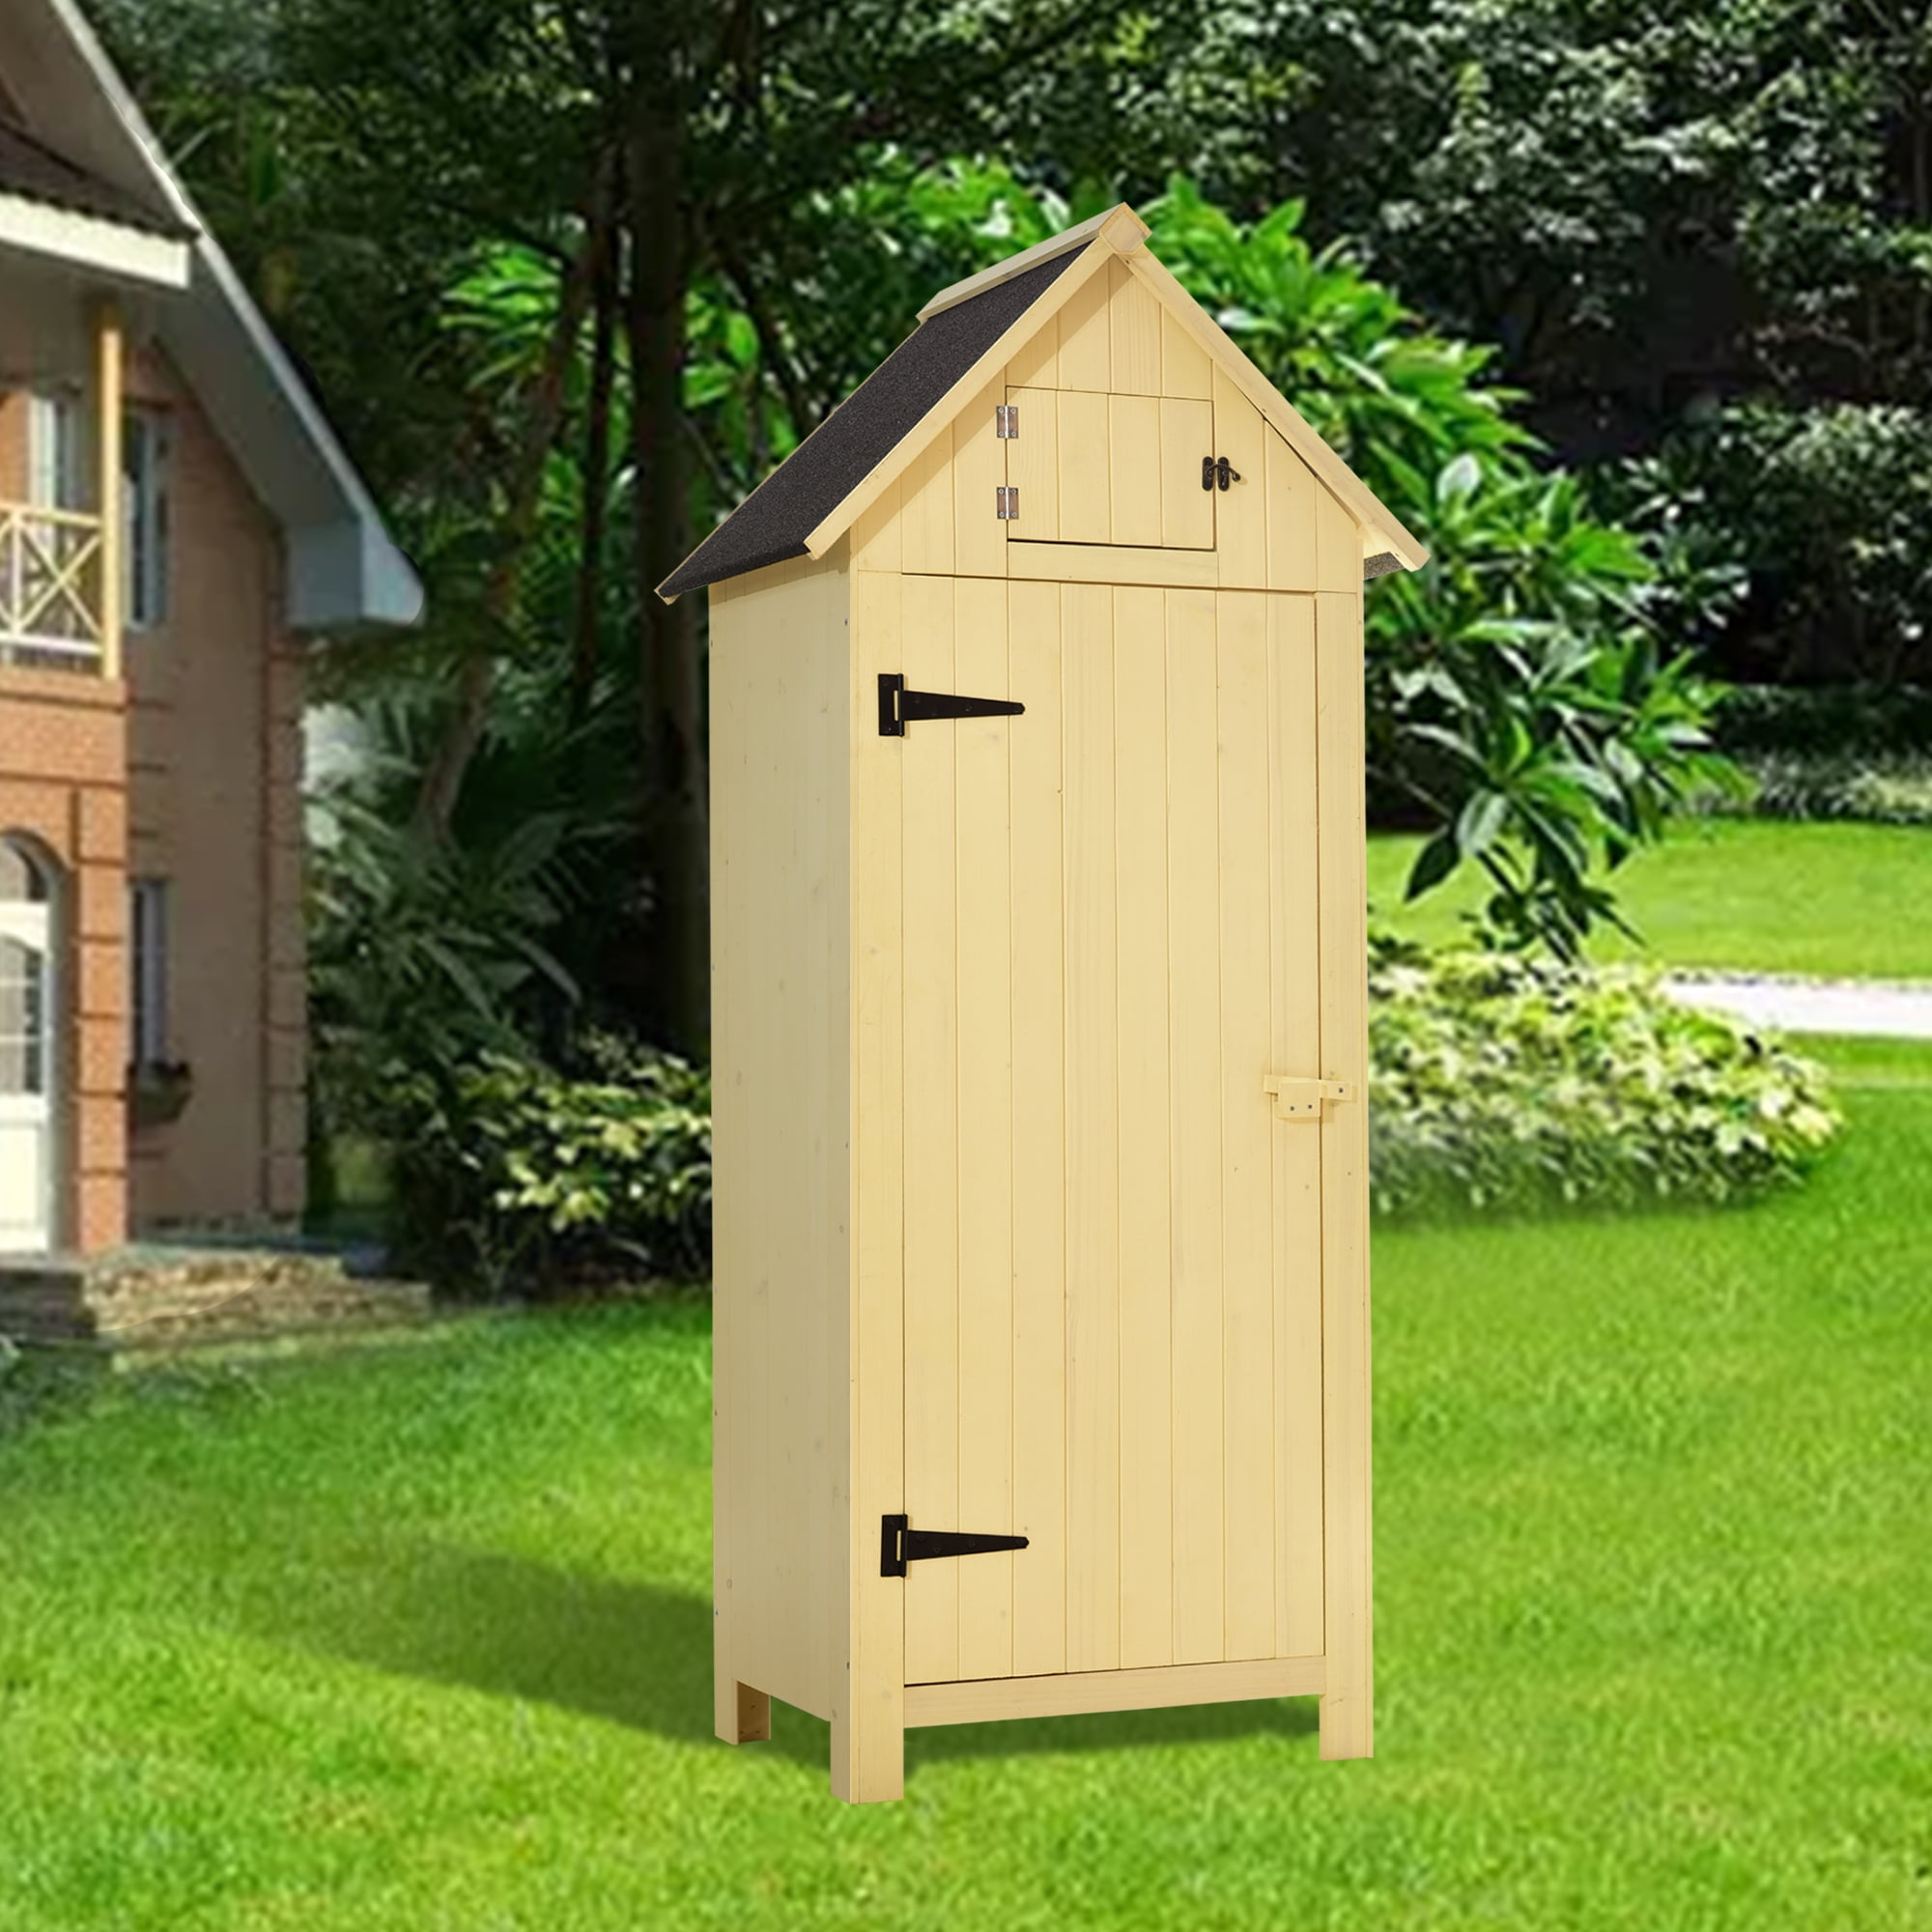 MCombo Outdoor Storage Cabinet Tool Shed Wooden Garden 